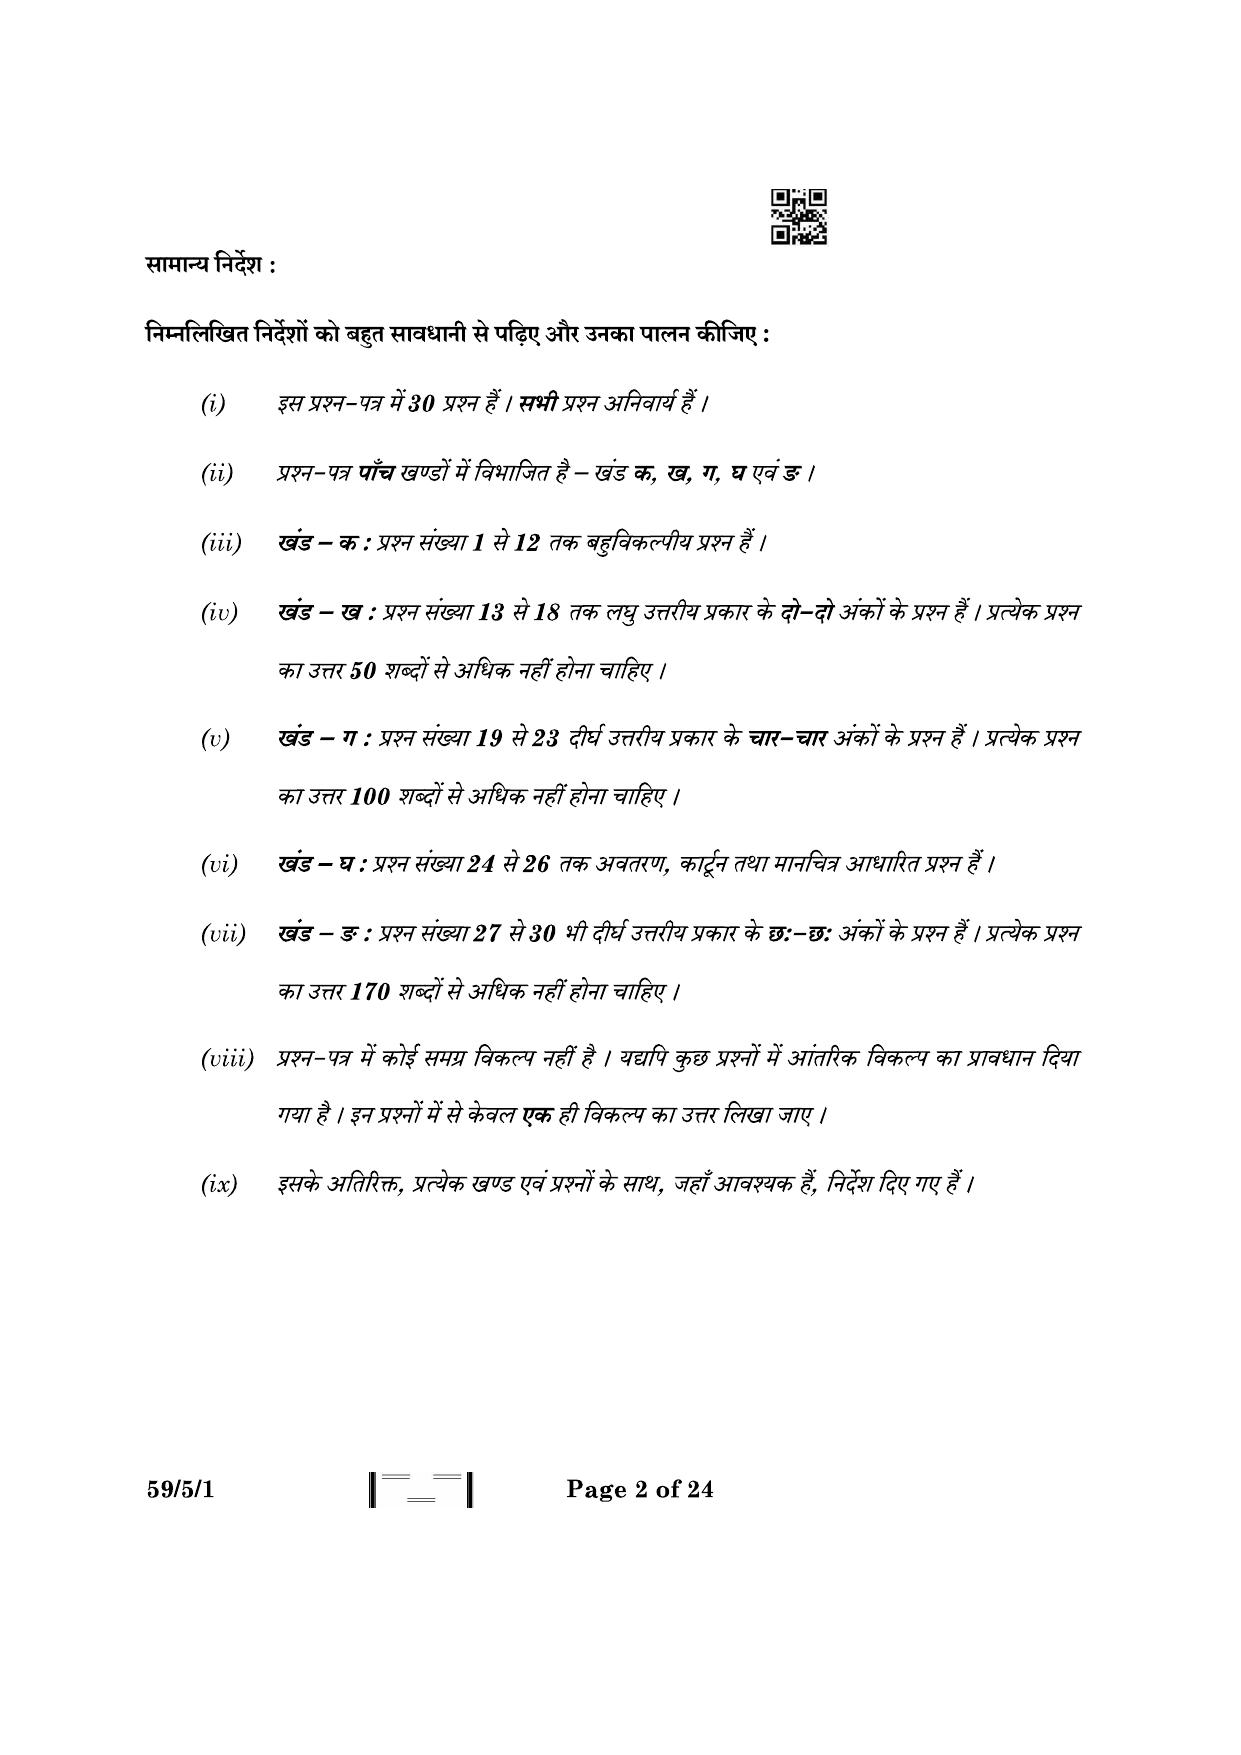 CBSE Class 12 59-5-1 Political Science 2023 Question Paper - Page 2